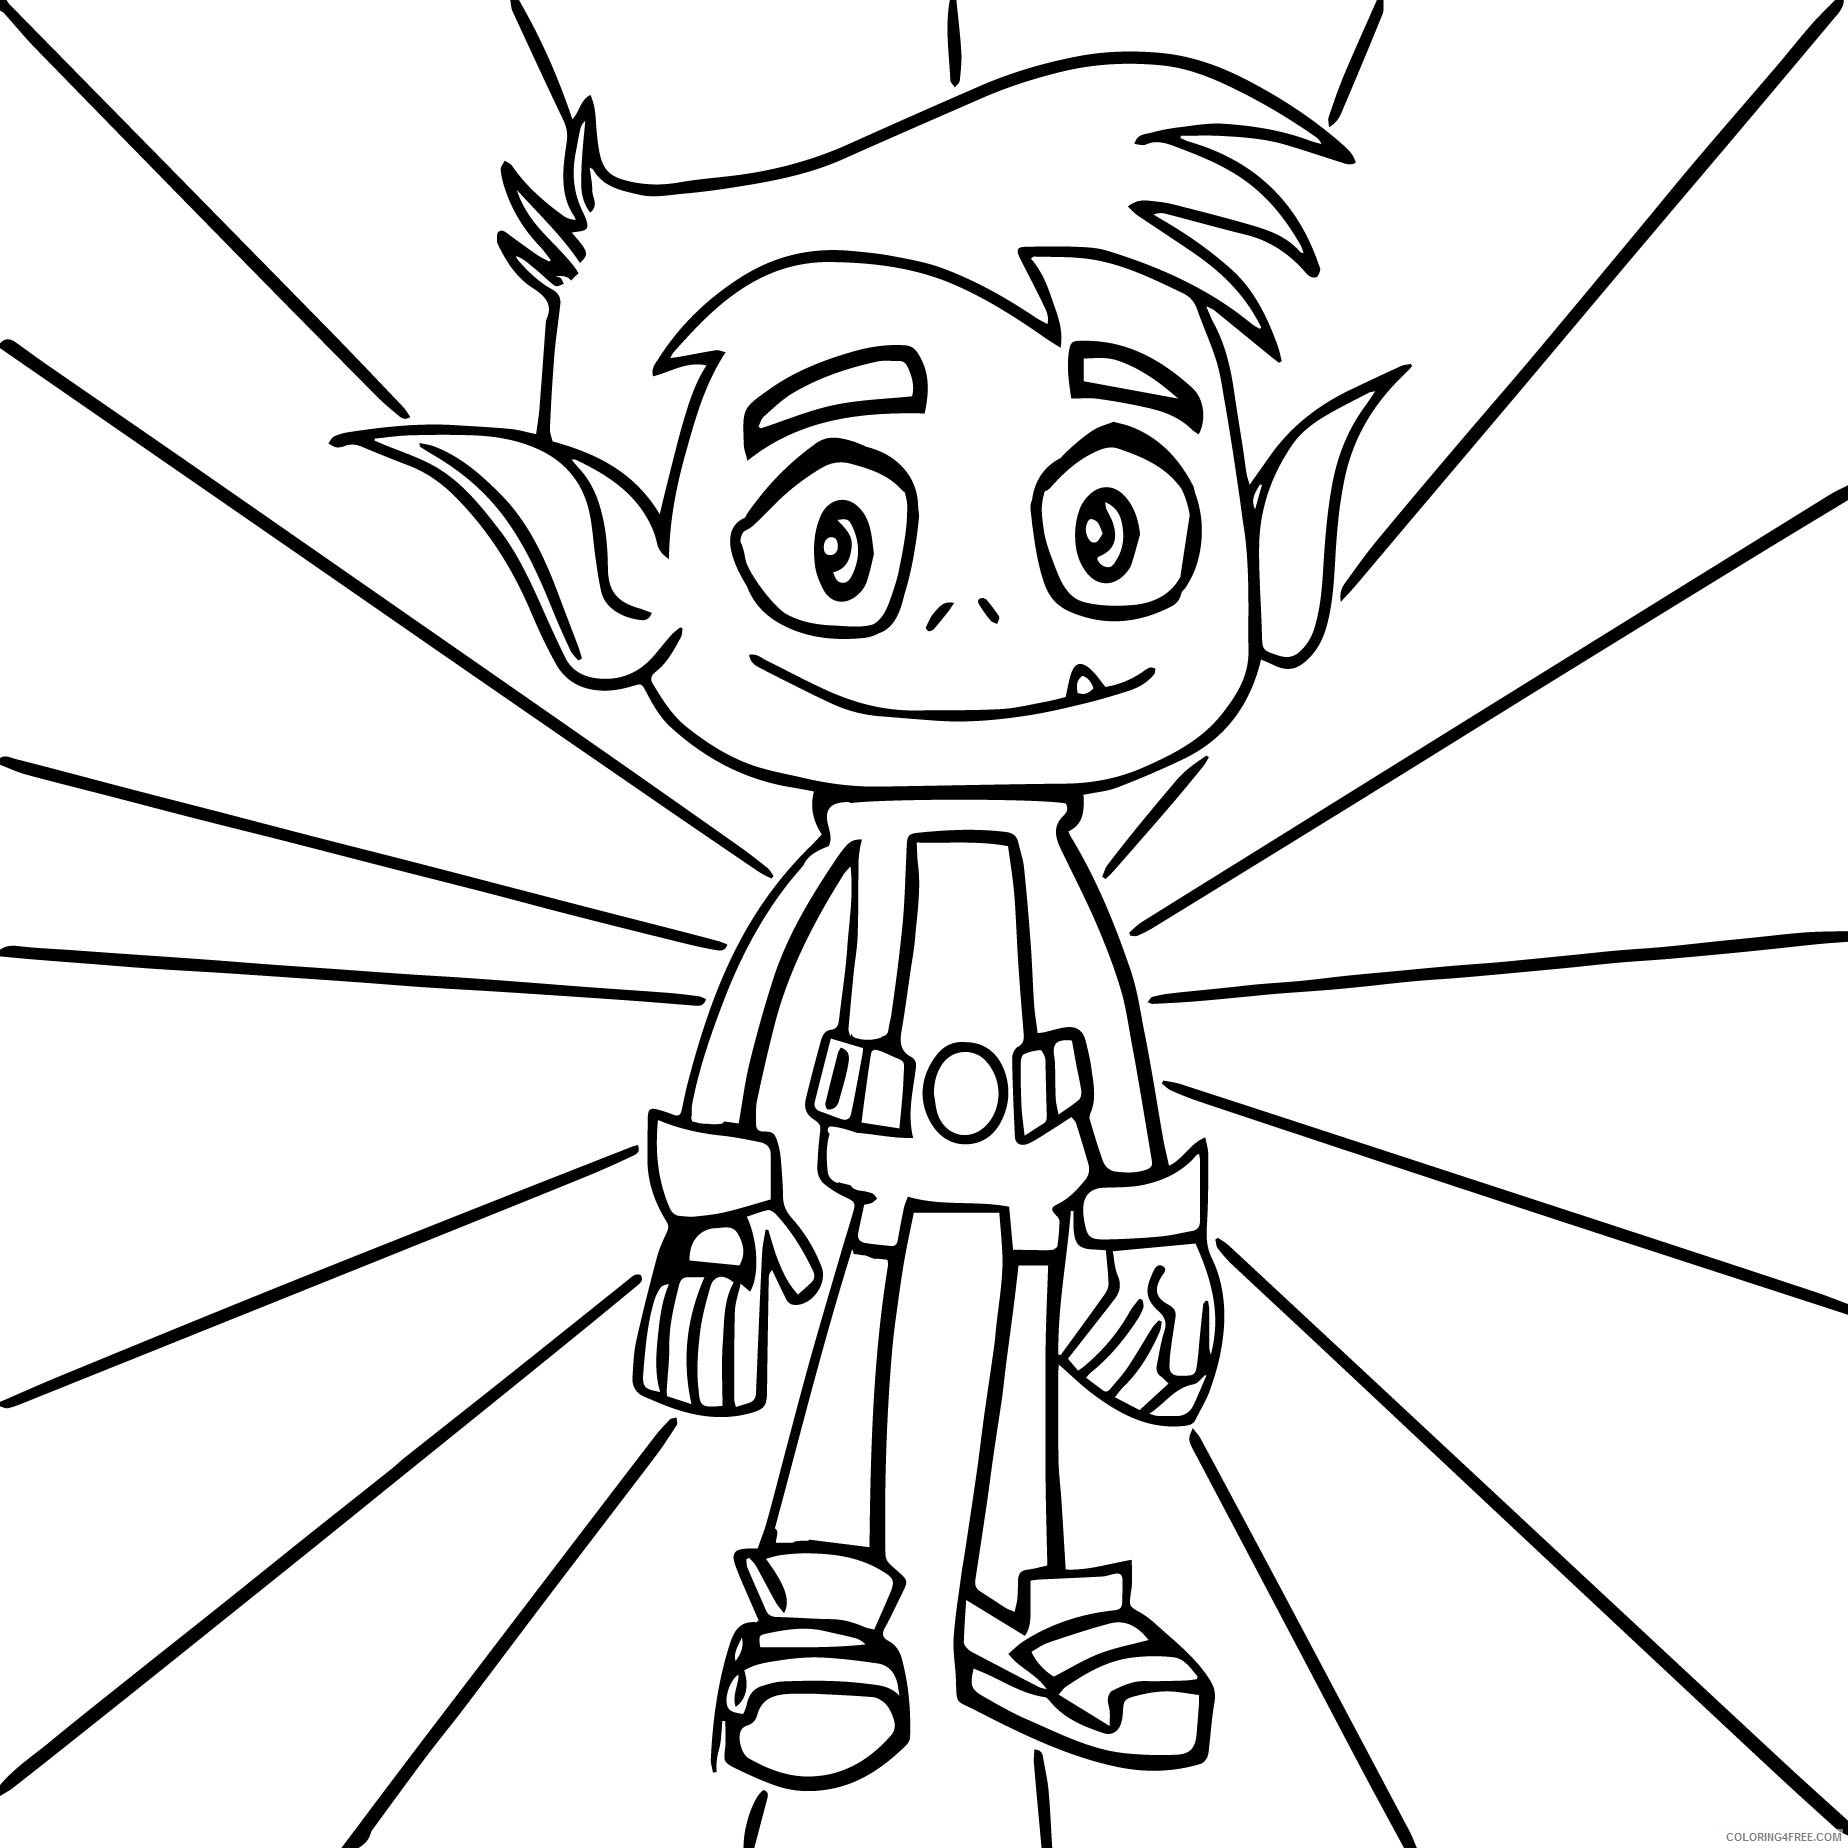 Teen Titans Go Coloring Pages Cartoons 1528101795_teen titans go gallery of gta 5 Printable 2020 6145 Coloring4free